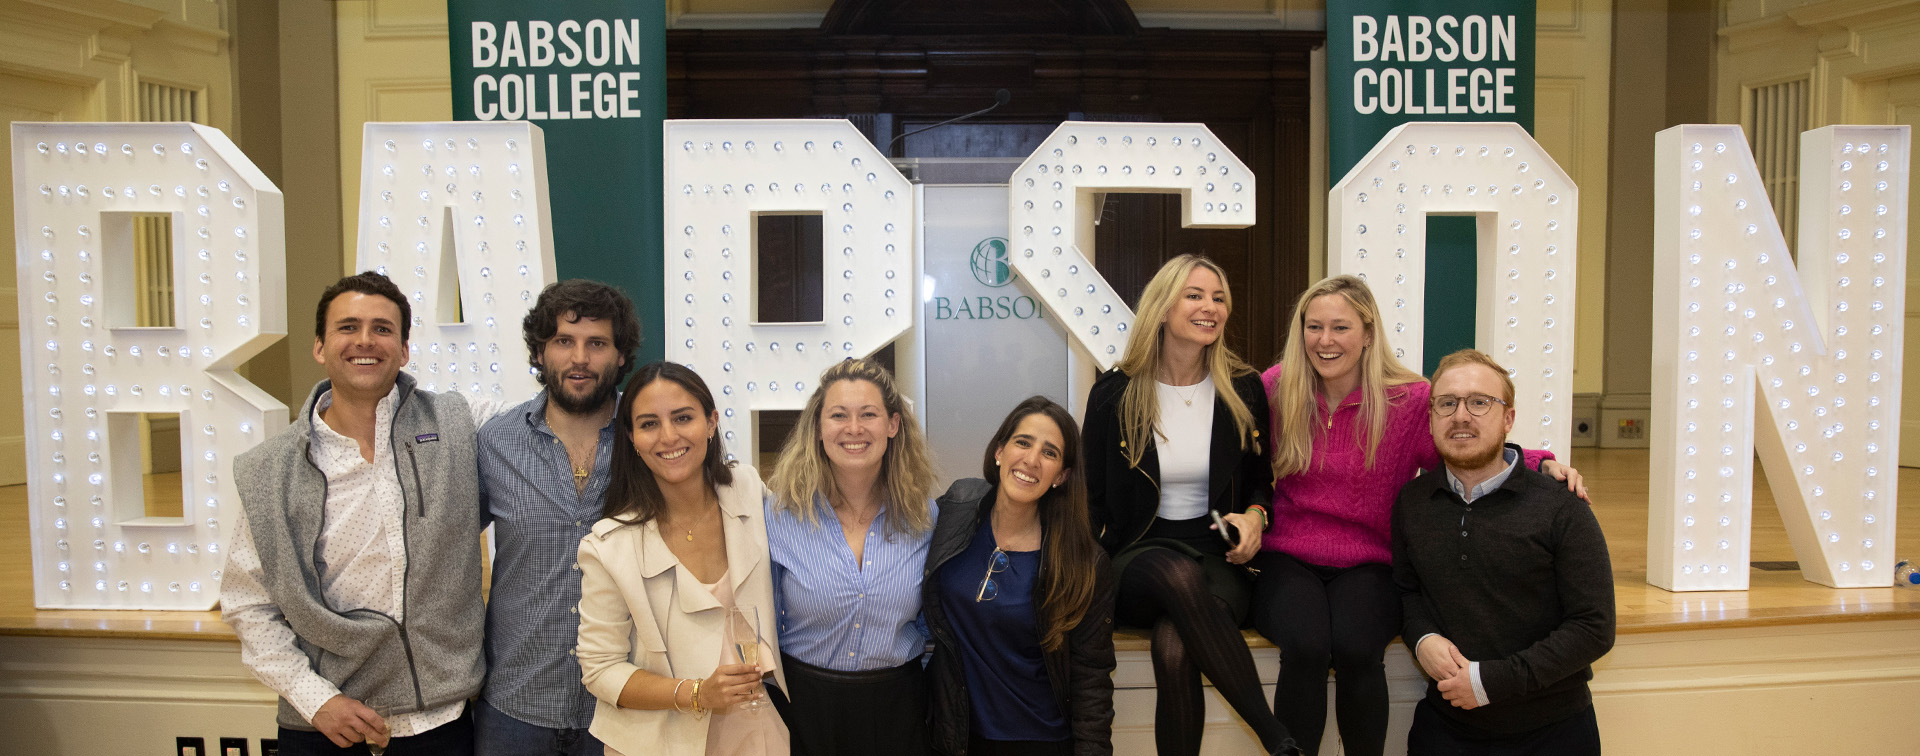 Students in front of Babson signage